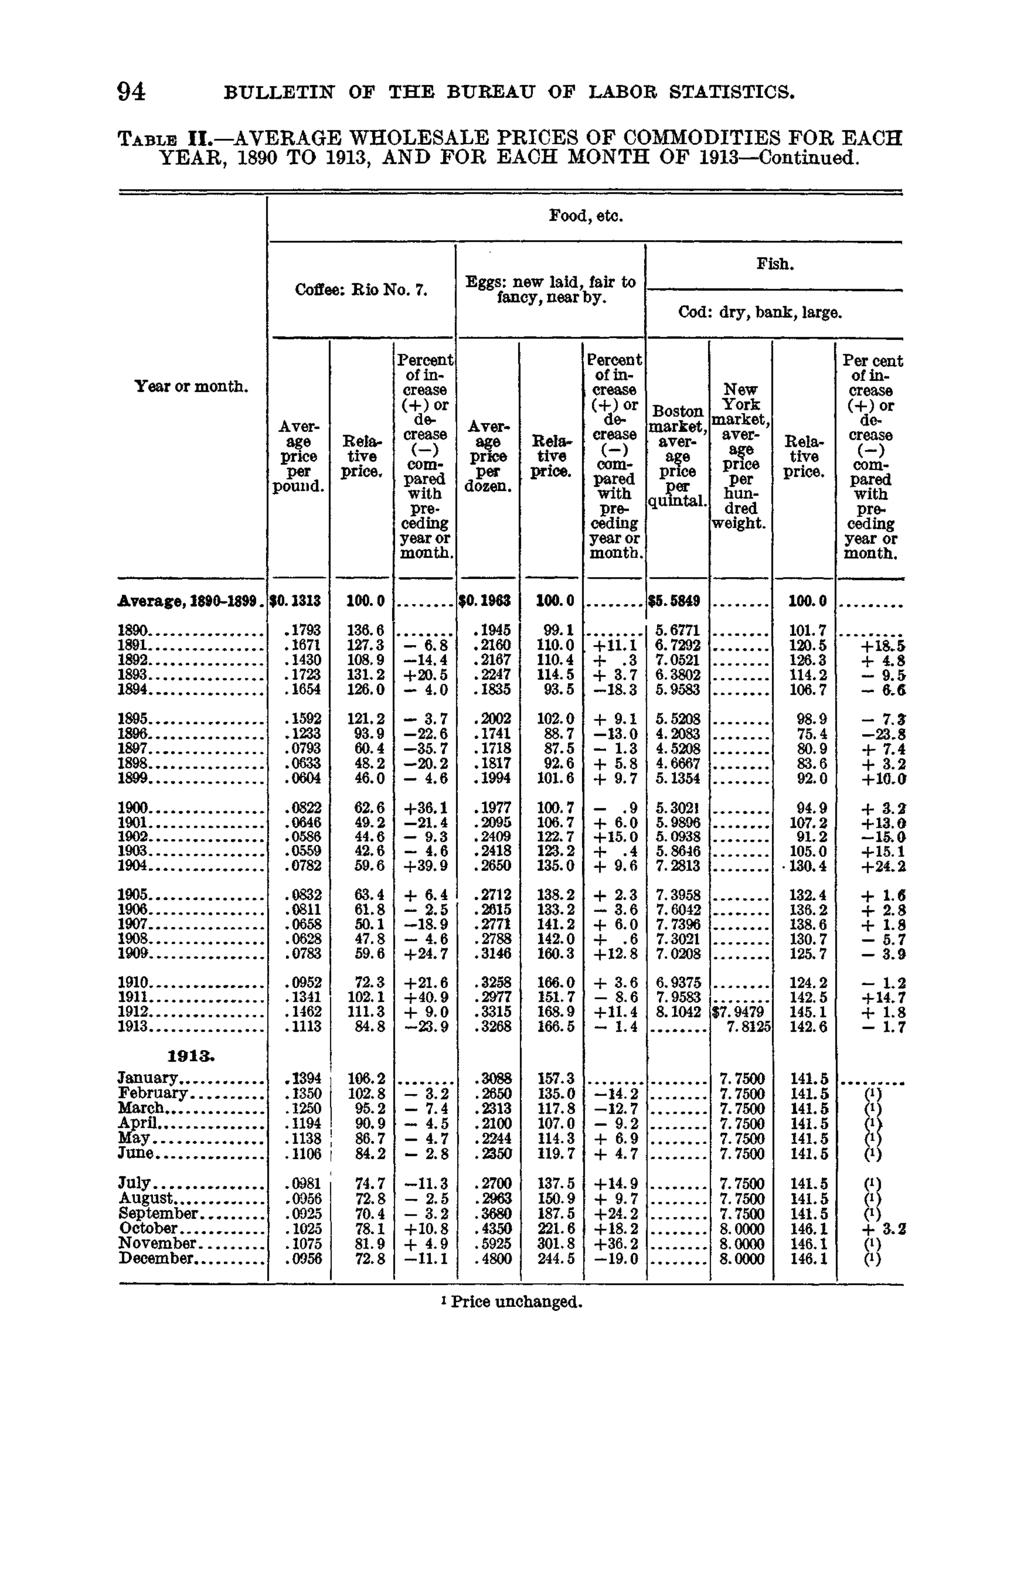 94 BULLETIN OF THE BUREAU OF LABOR STATISTICS. Table II. AVERAGE WHOLESALE PRICES OF COMMODITIES FOR EACH YEAR, 1890 TO 1913, AND FOR EACH MONTH OF 1913 Continued. Food, etc. Coffee; R io No. 7.